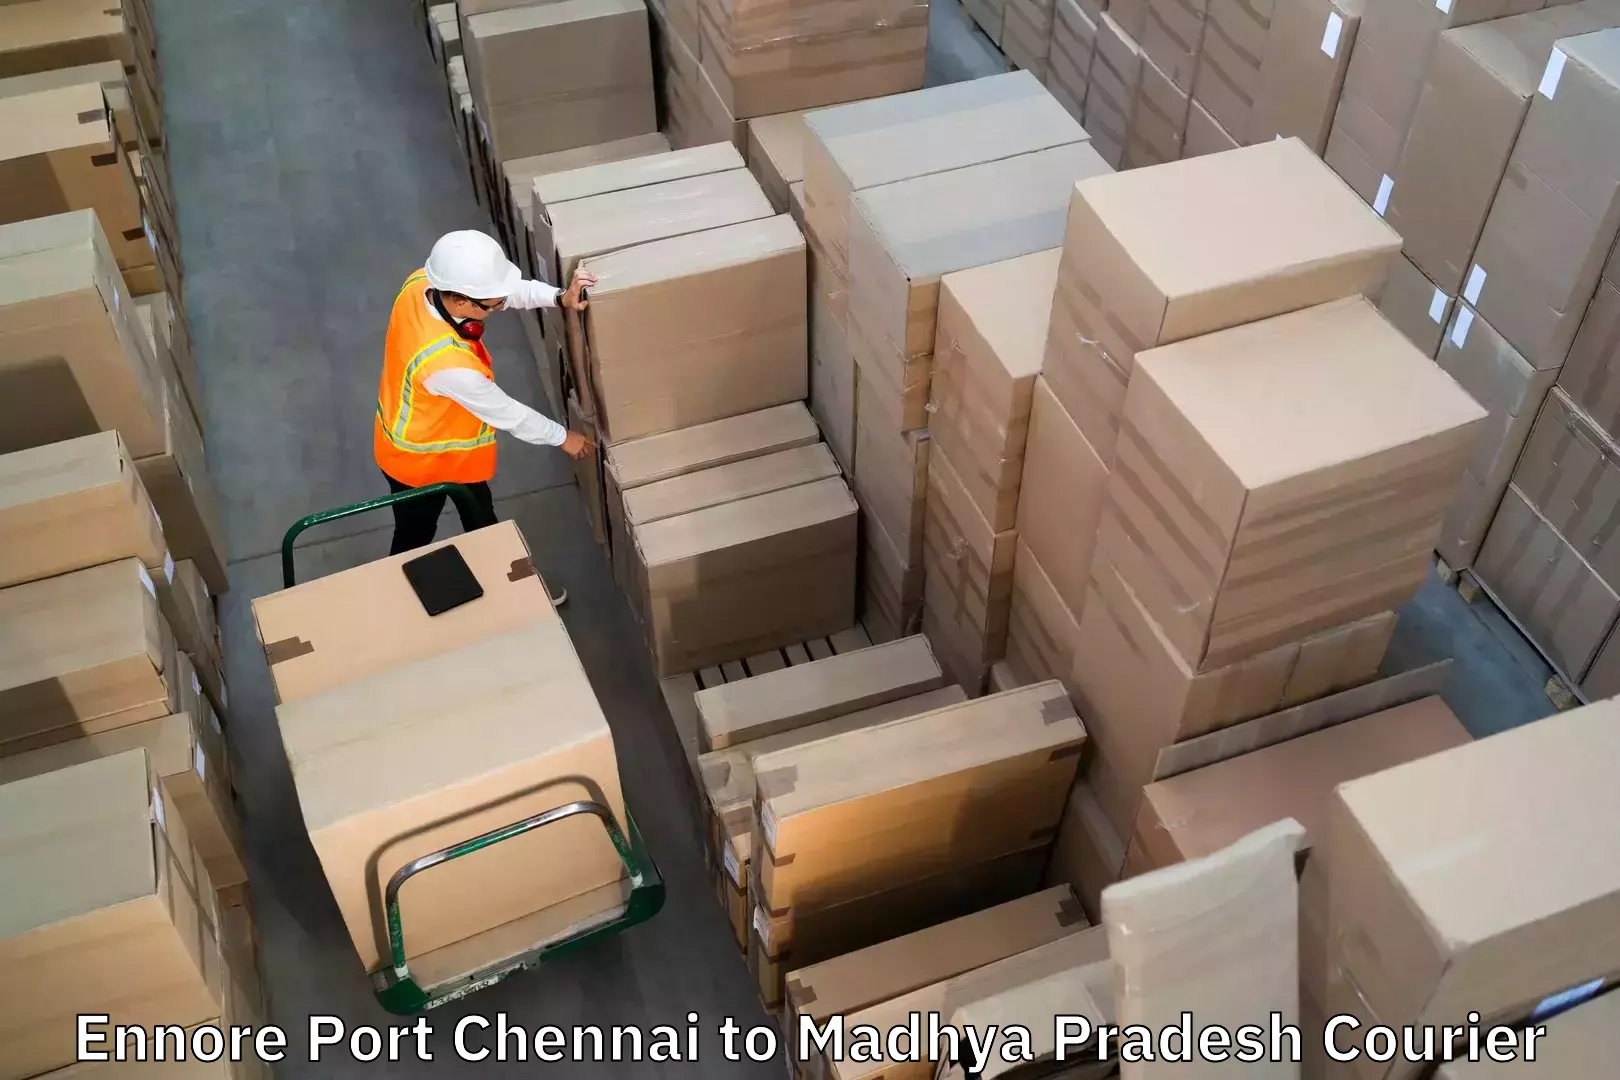 Baggage transport services Ennore Port Chennai to Satna